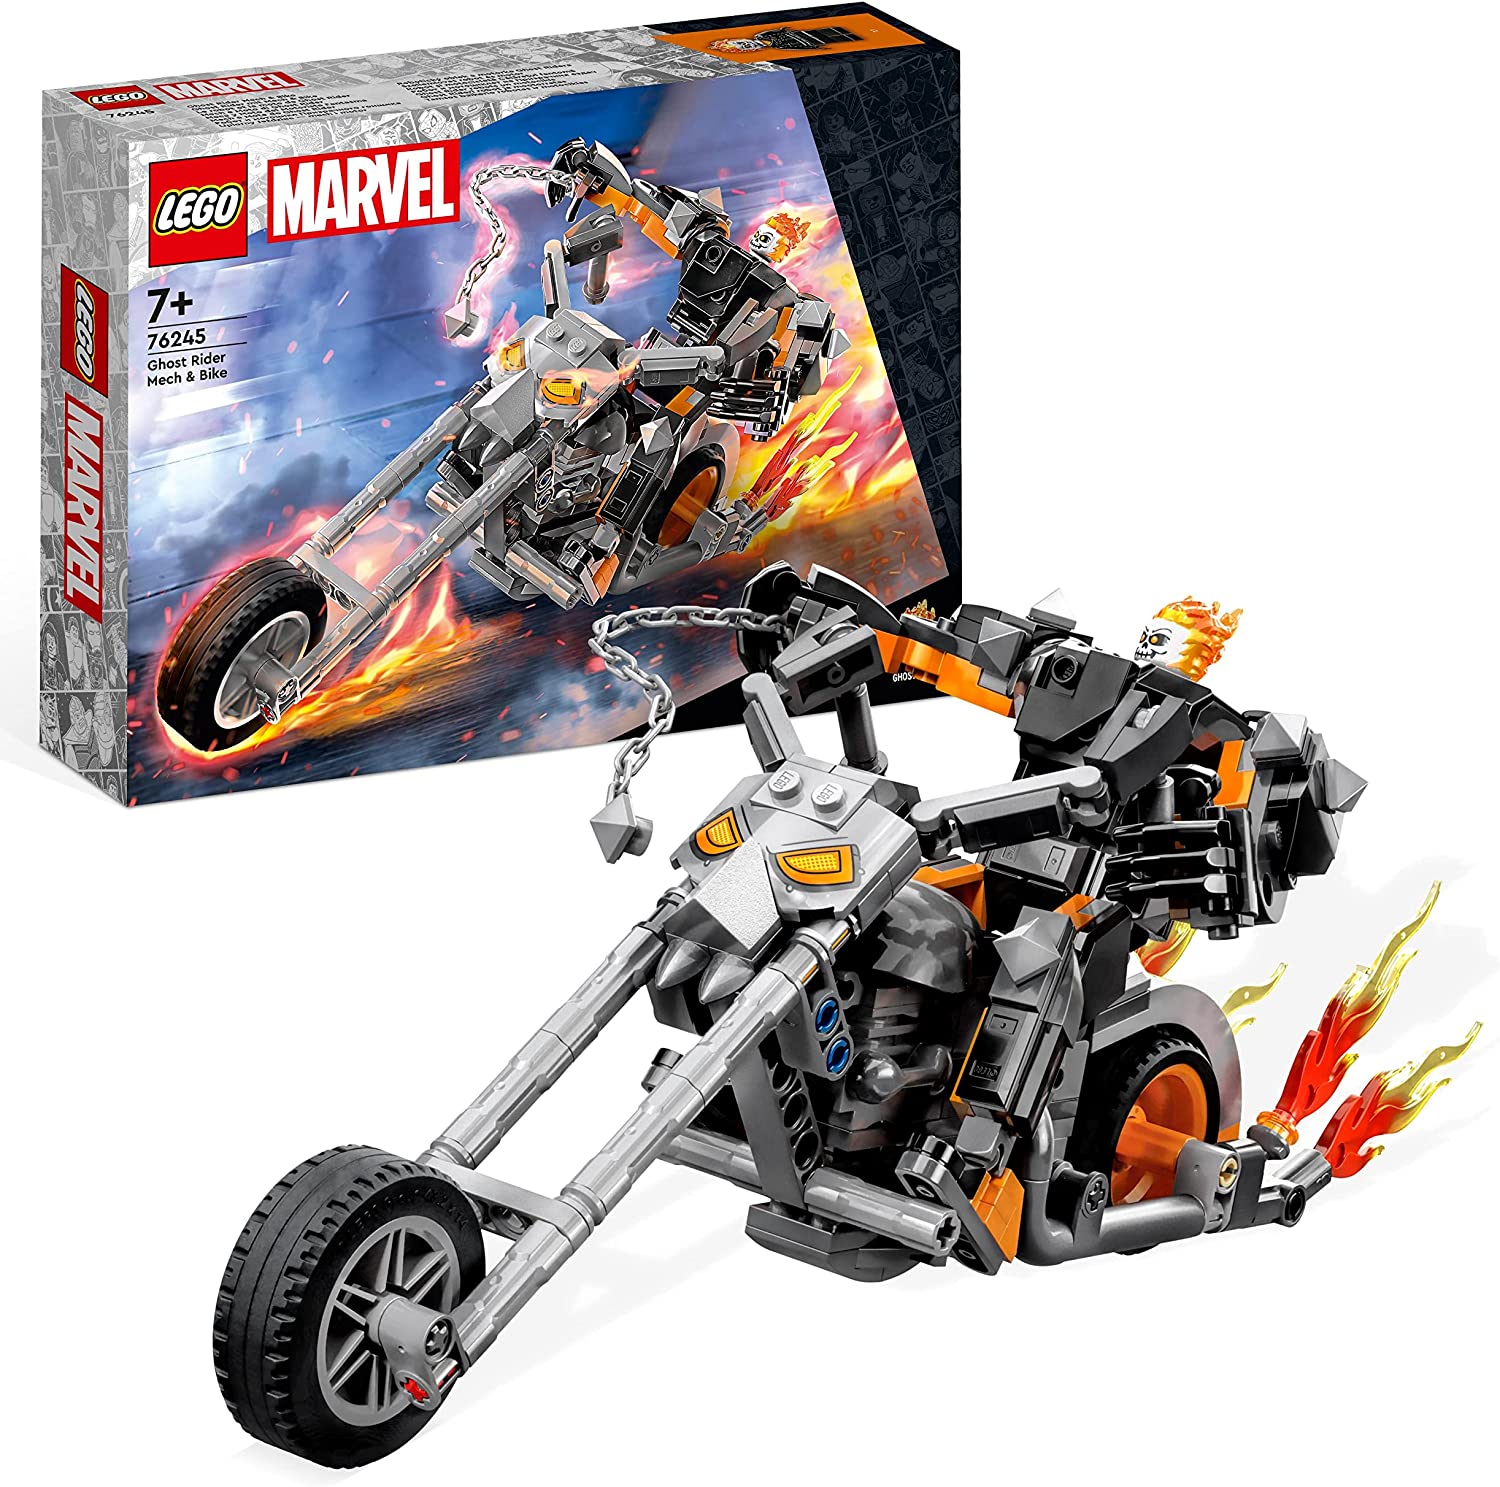 LEGO 76245 Marvel Ghost Rider with Mech & Bike, Superhero Motorcycle Toy for Building with Chain and Action Figure, Gift for Children from 7 Years